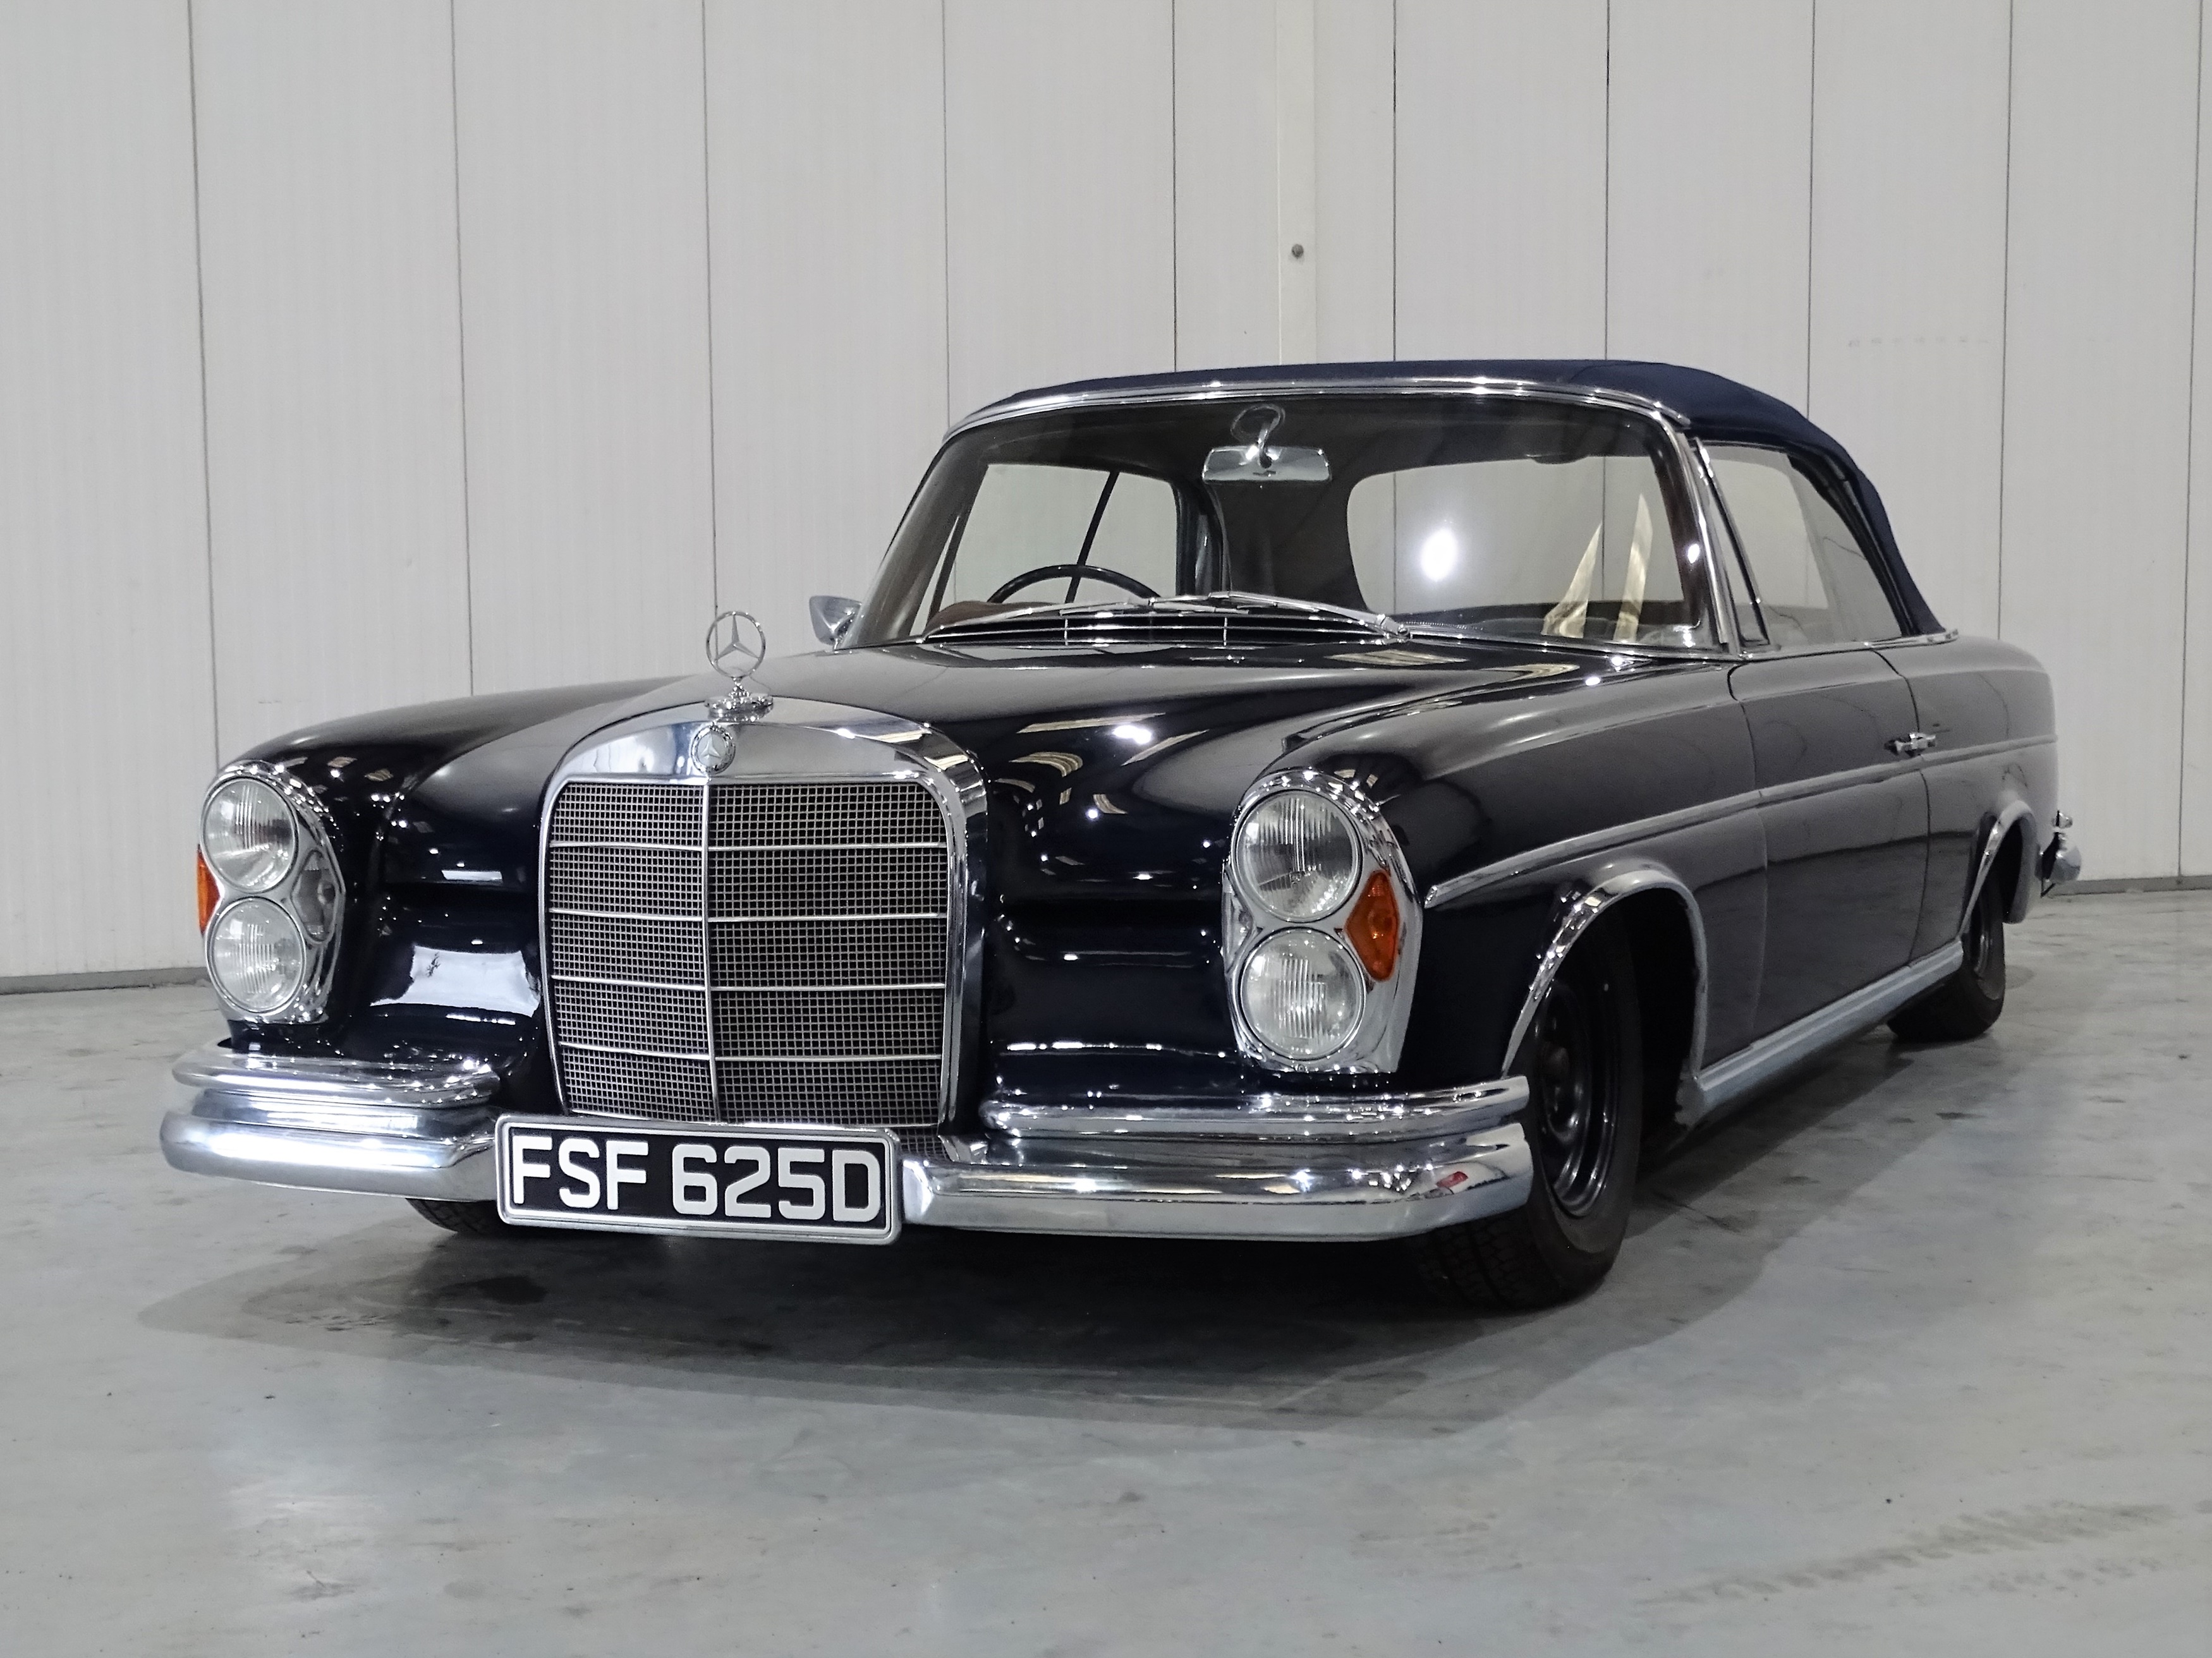 1966 Mercedes-Benz 300 SE Cabriolet sold with H&H Classics